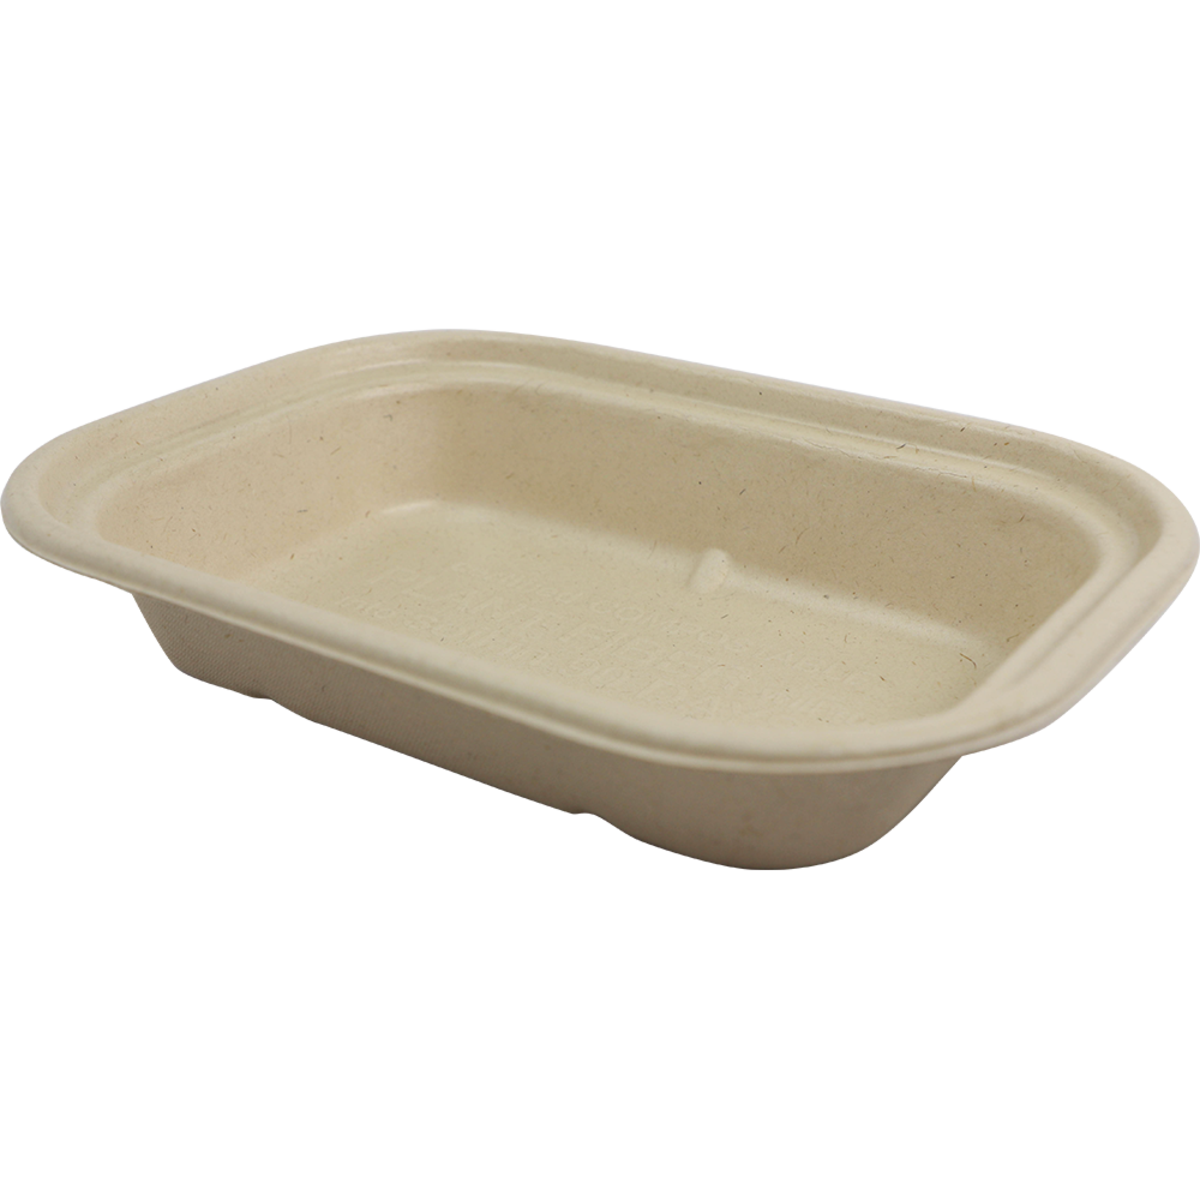 17 oz Compostable Fiber To Go Box Container with PLA Lining